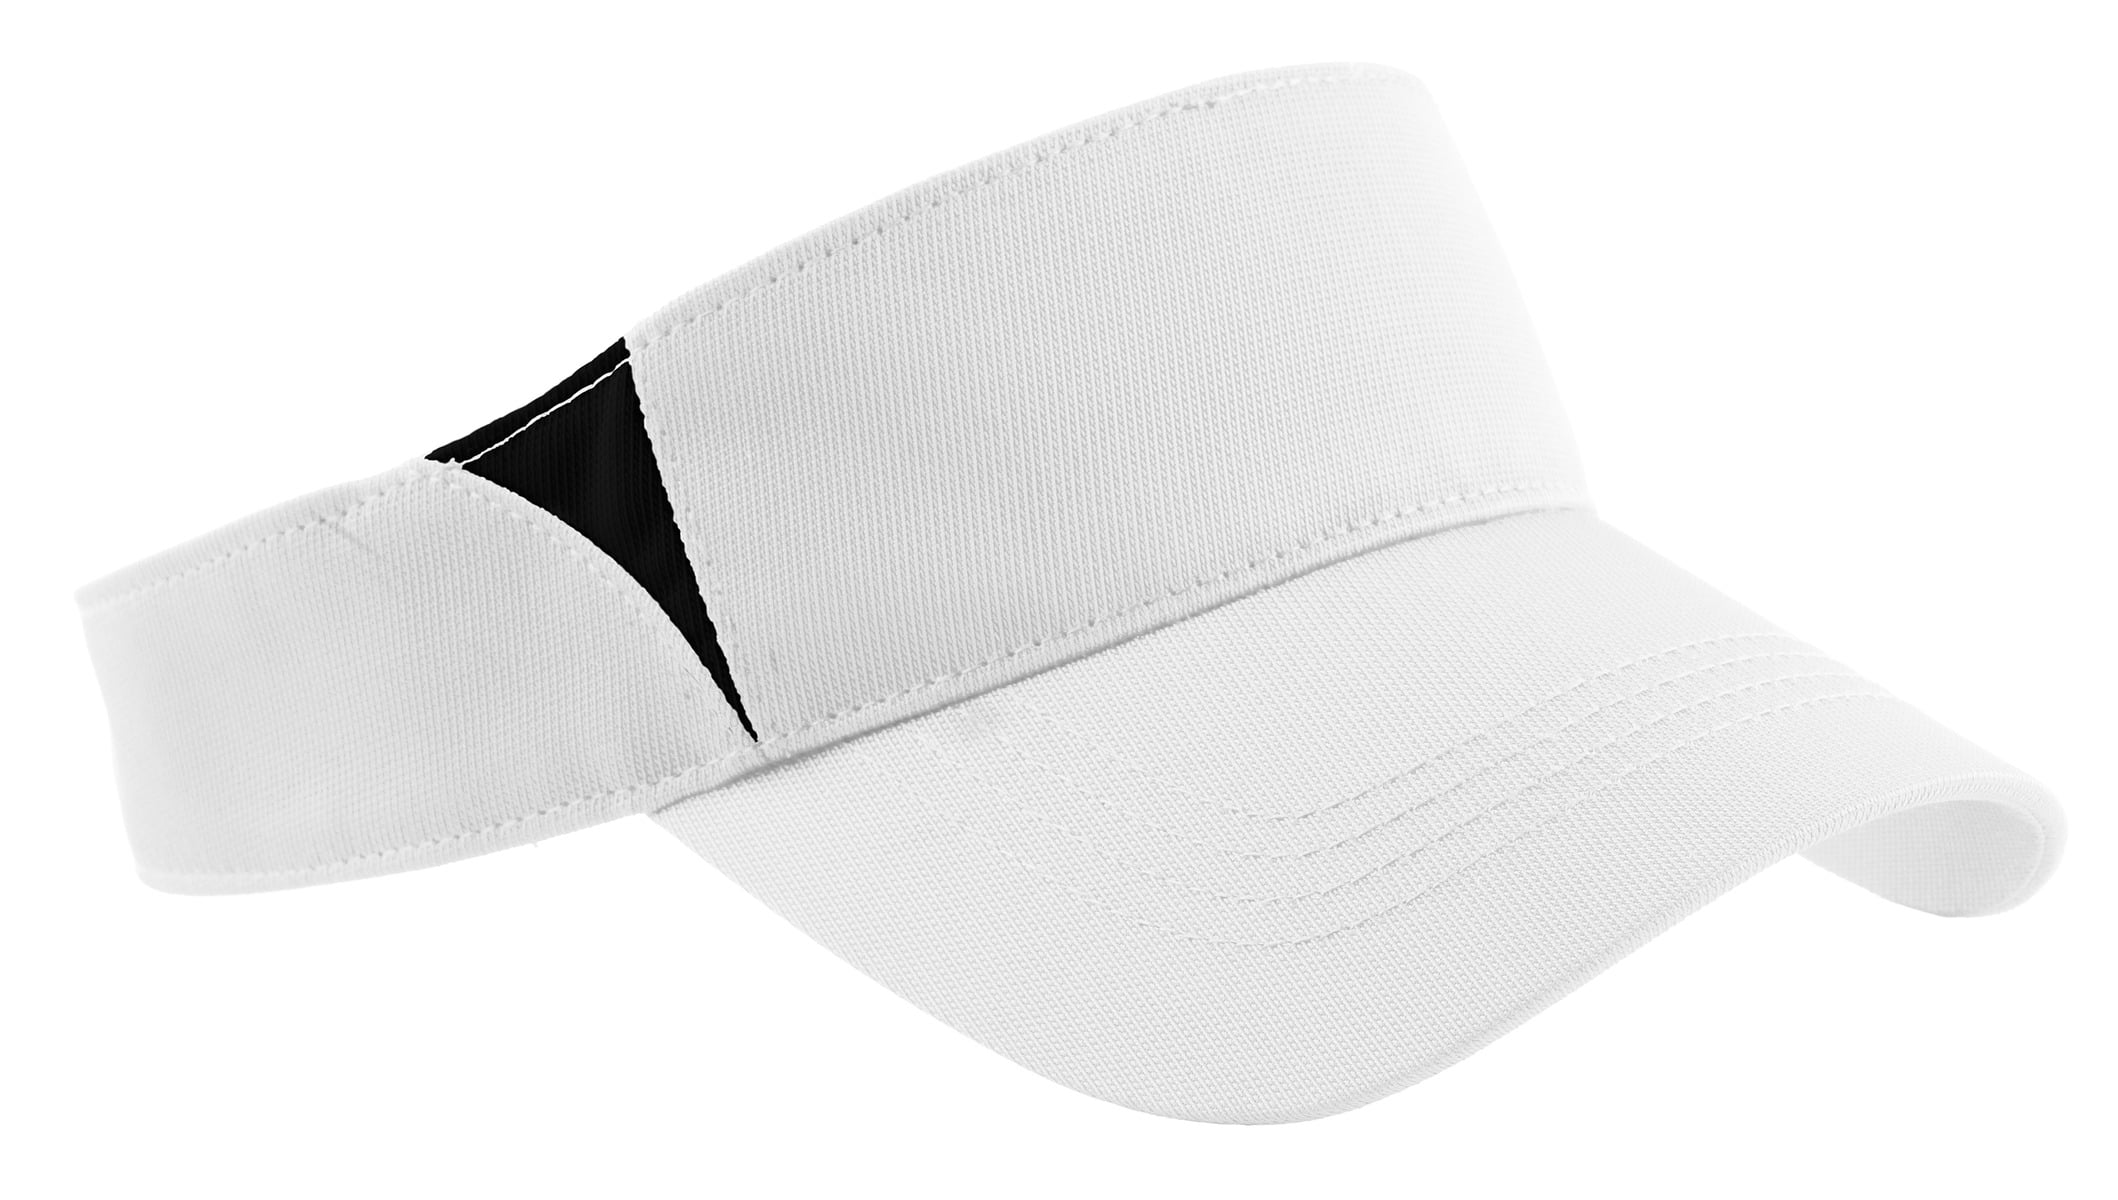 Details about   Halo Headband Cap Tail White Sweat Absorbent Sun Protection Breathable Fabric 